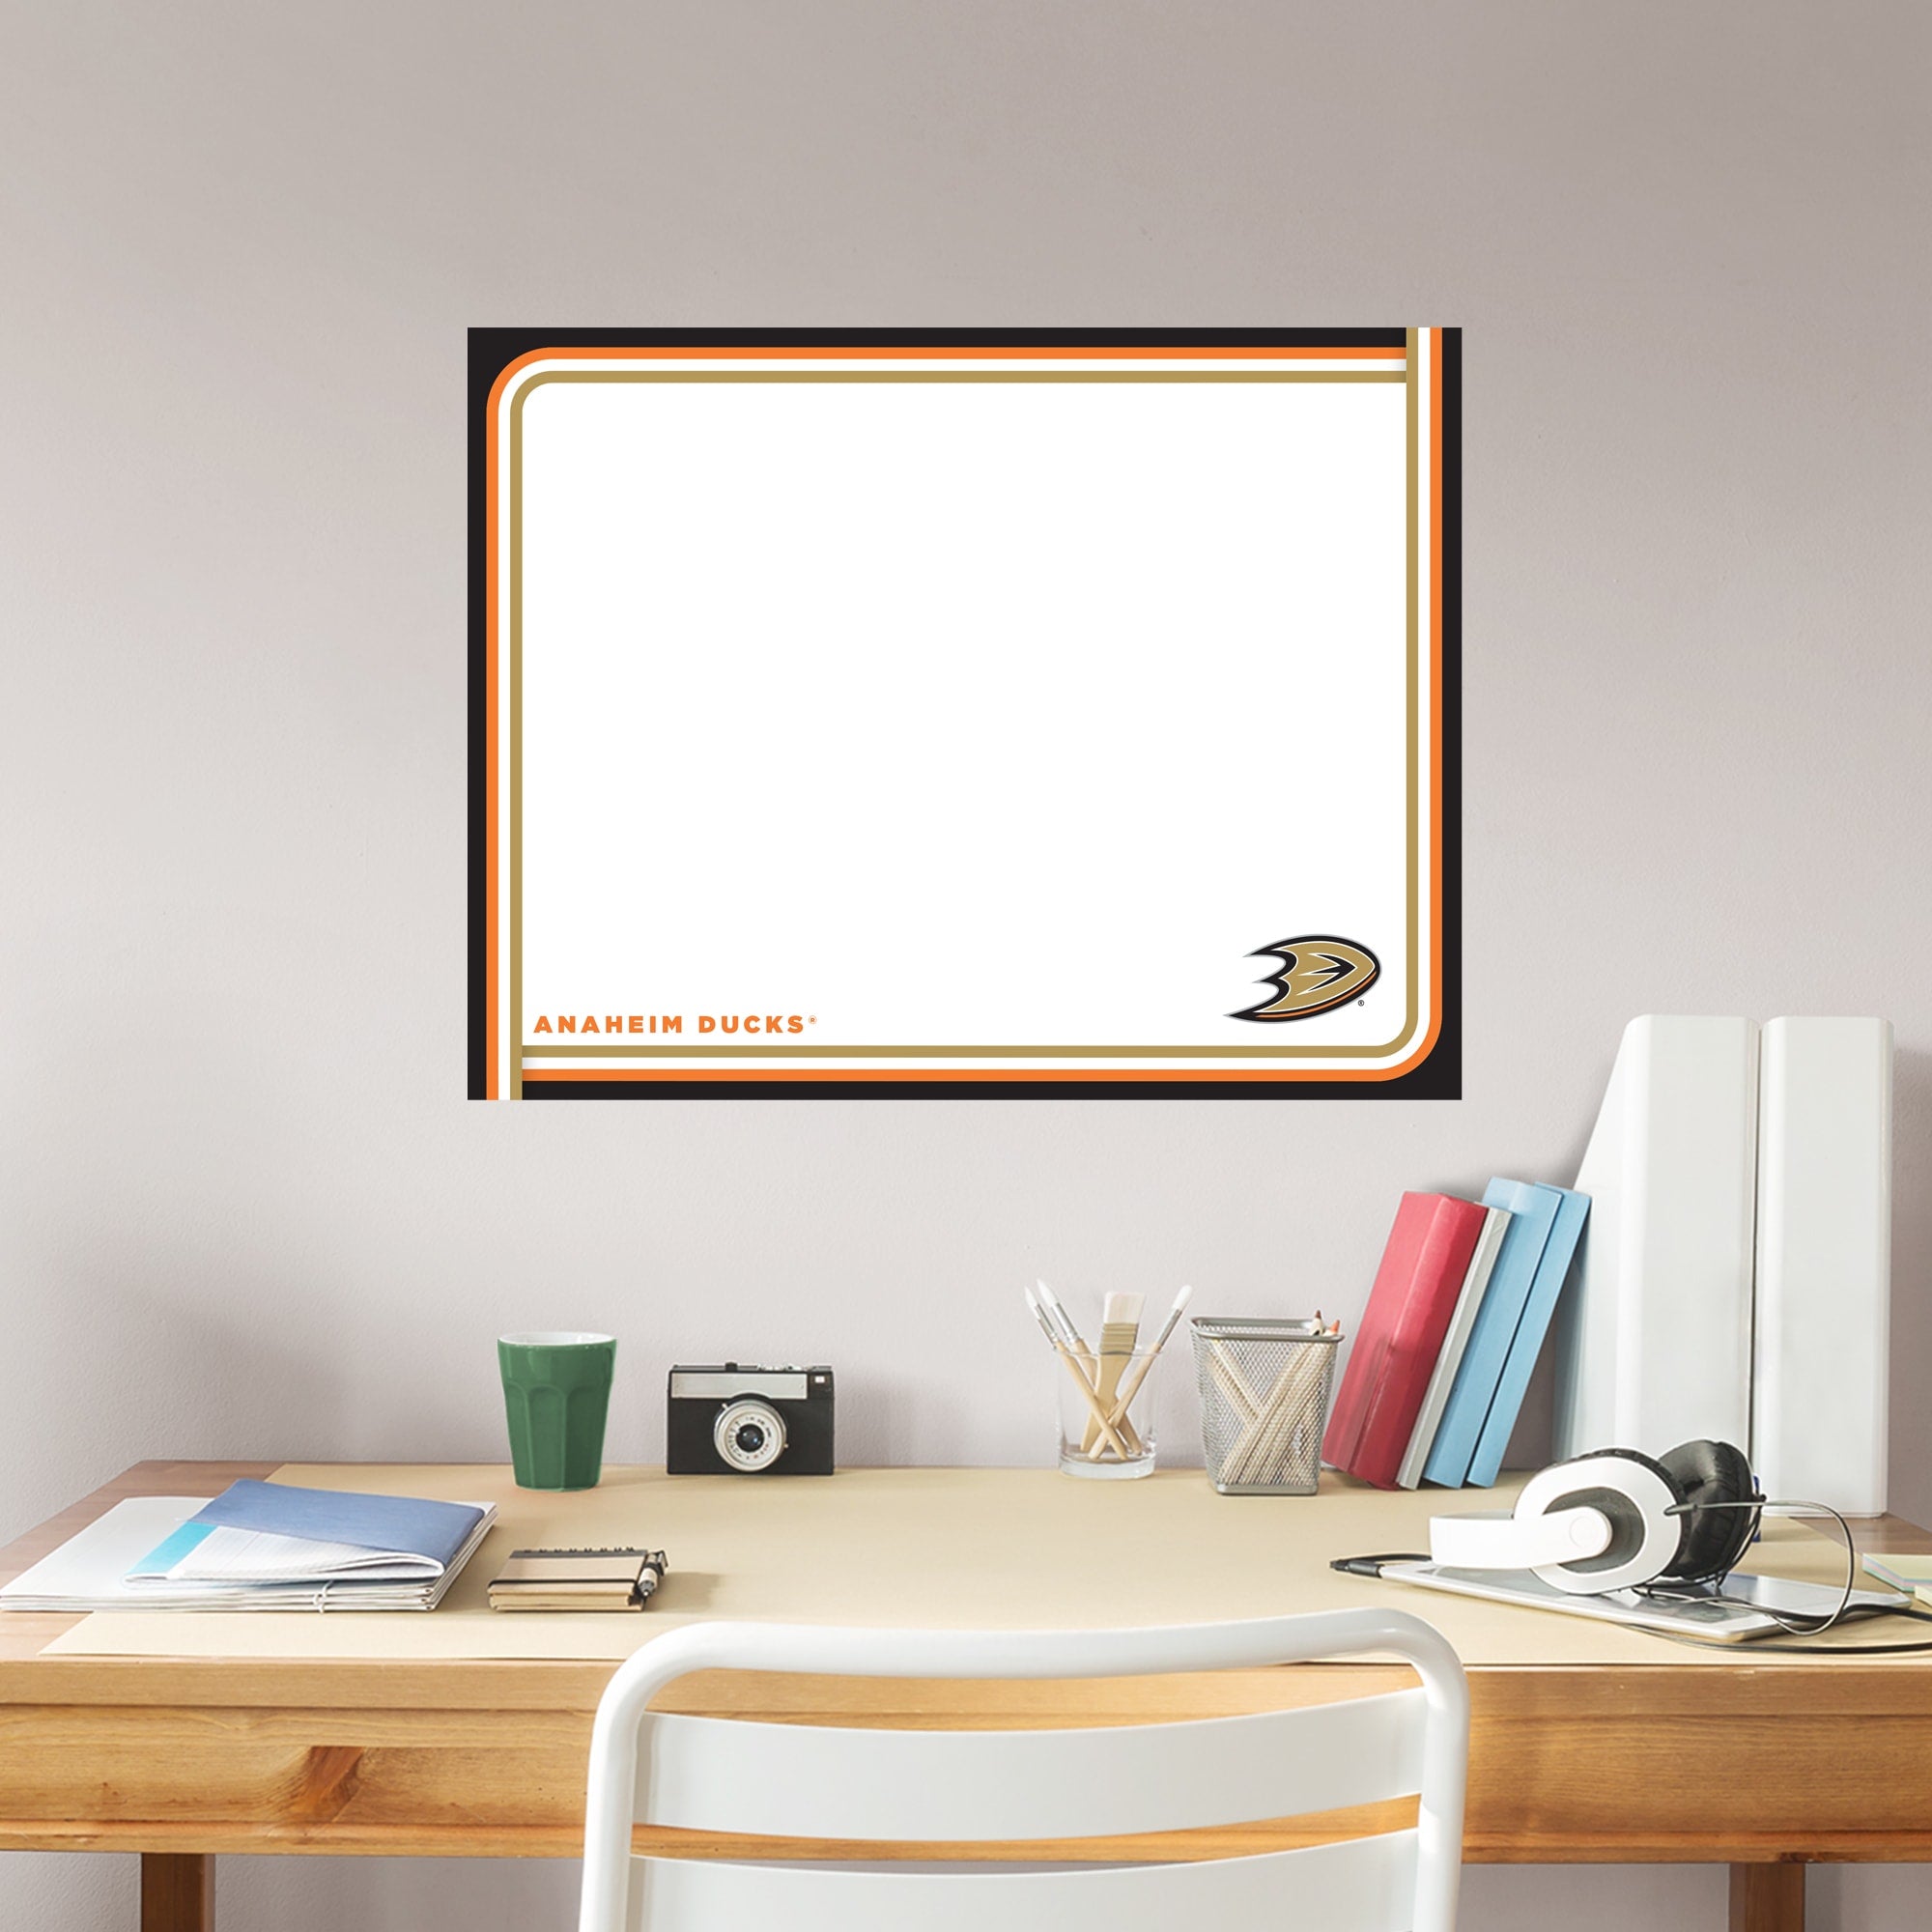 Anaheim Ducks: Dry Erase Whiteboard - X-Large Officially Licensed NHL Removable Wall Decal XL by Fathead | Vinyl